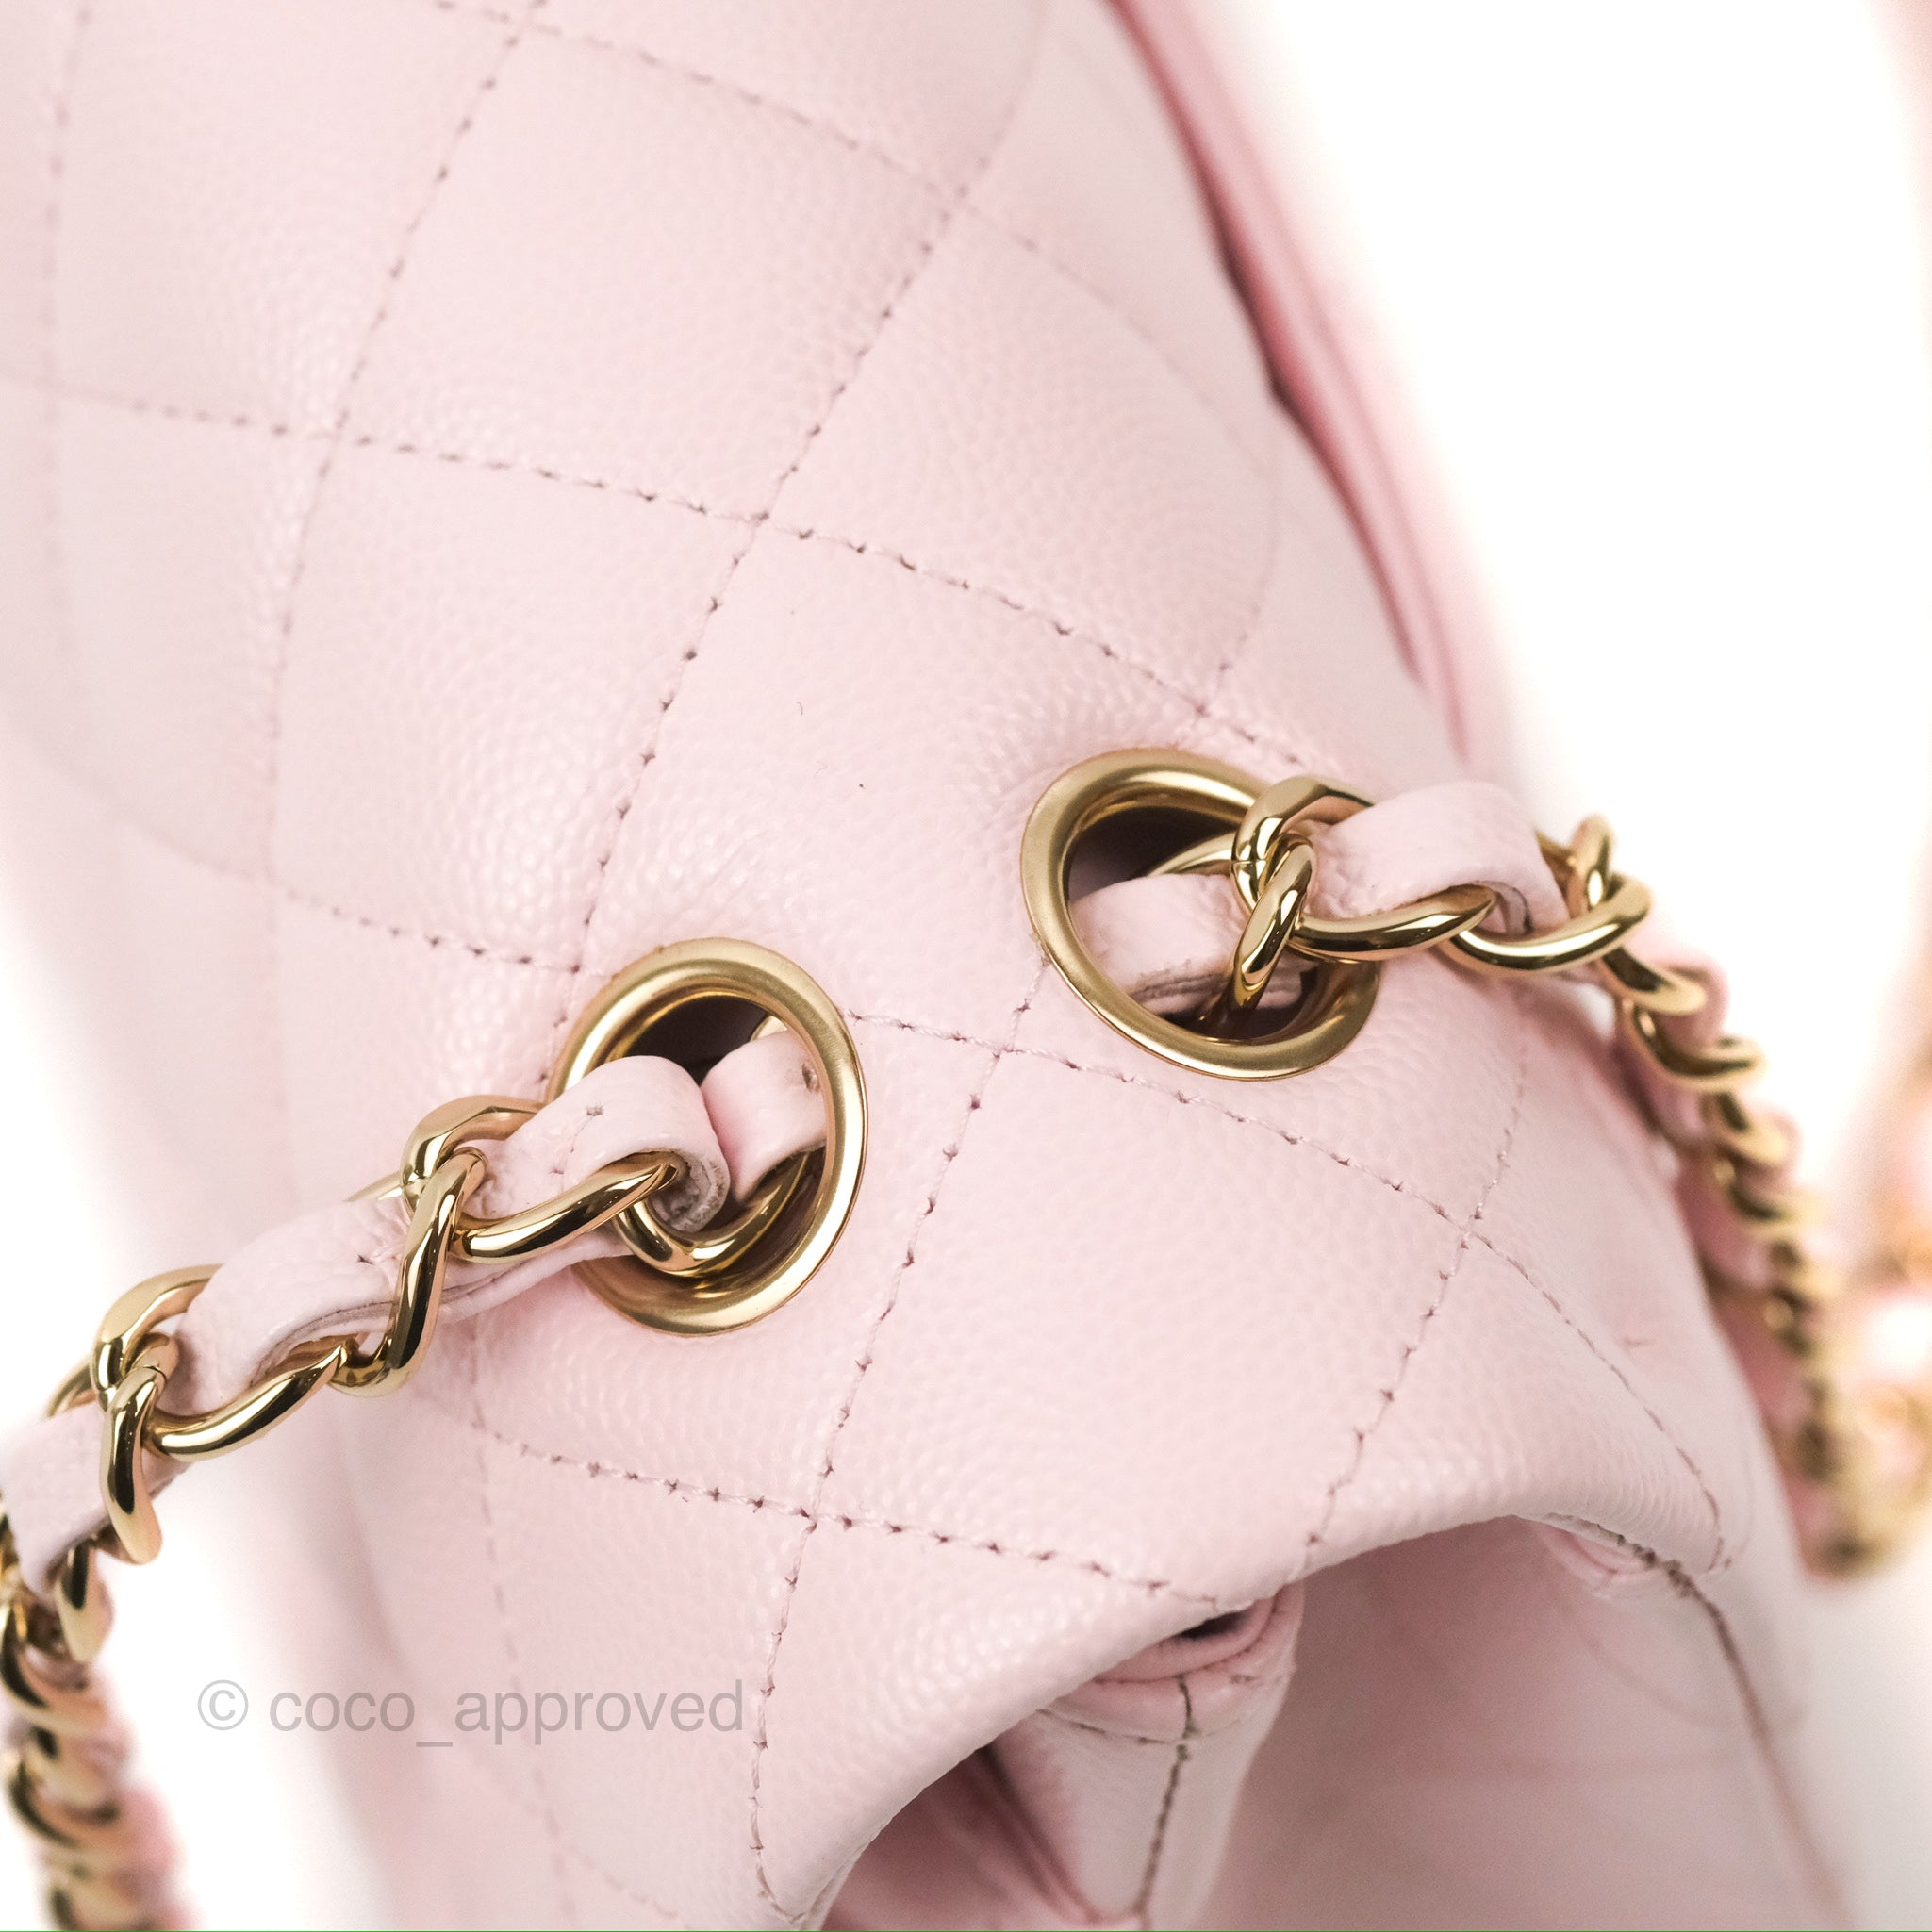 pink leather chanel bag authentic